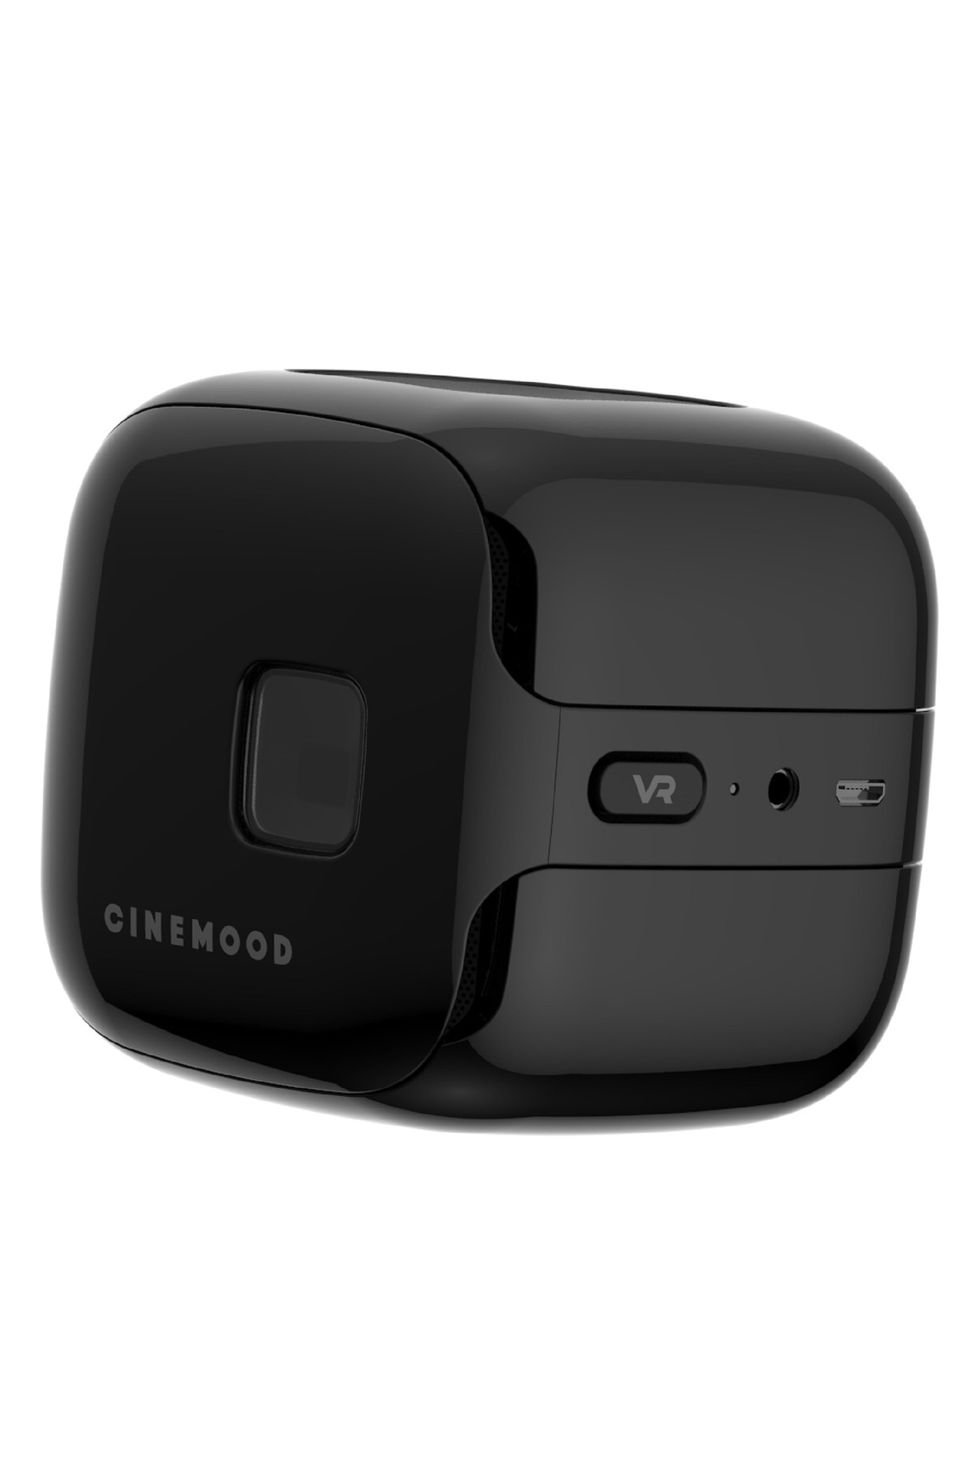 Cinemood 360º Portable Projector & Content Device